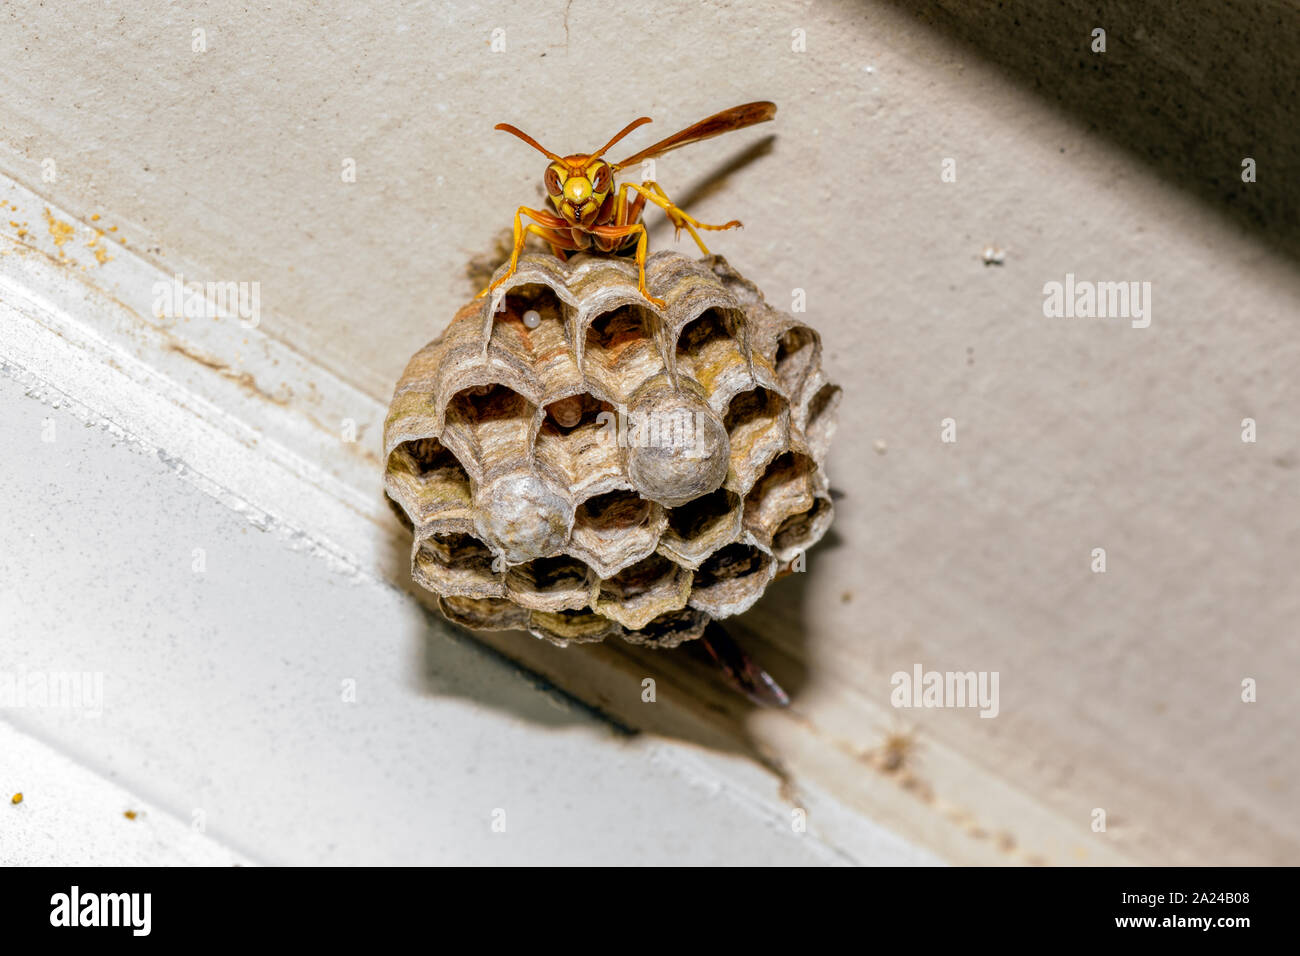 Paper Wasp - Polistes exclamans - guarding a nest with eggs and pupa Stock Photo